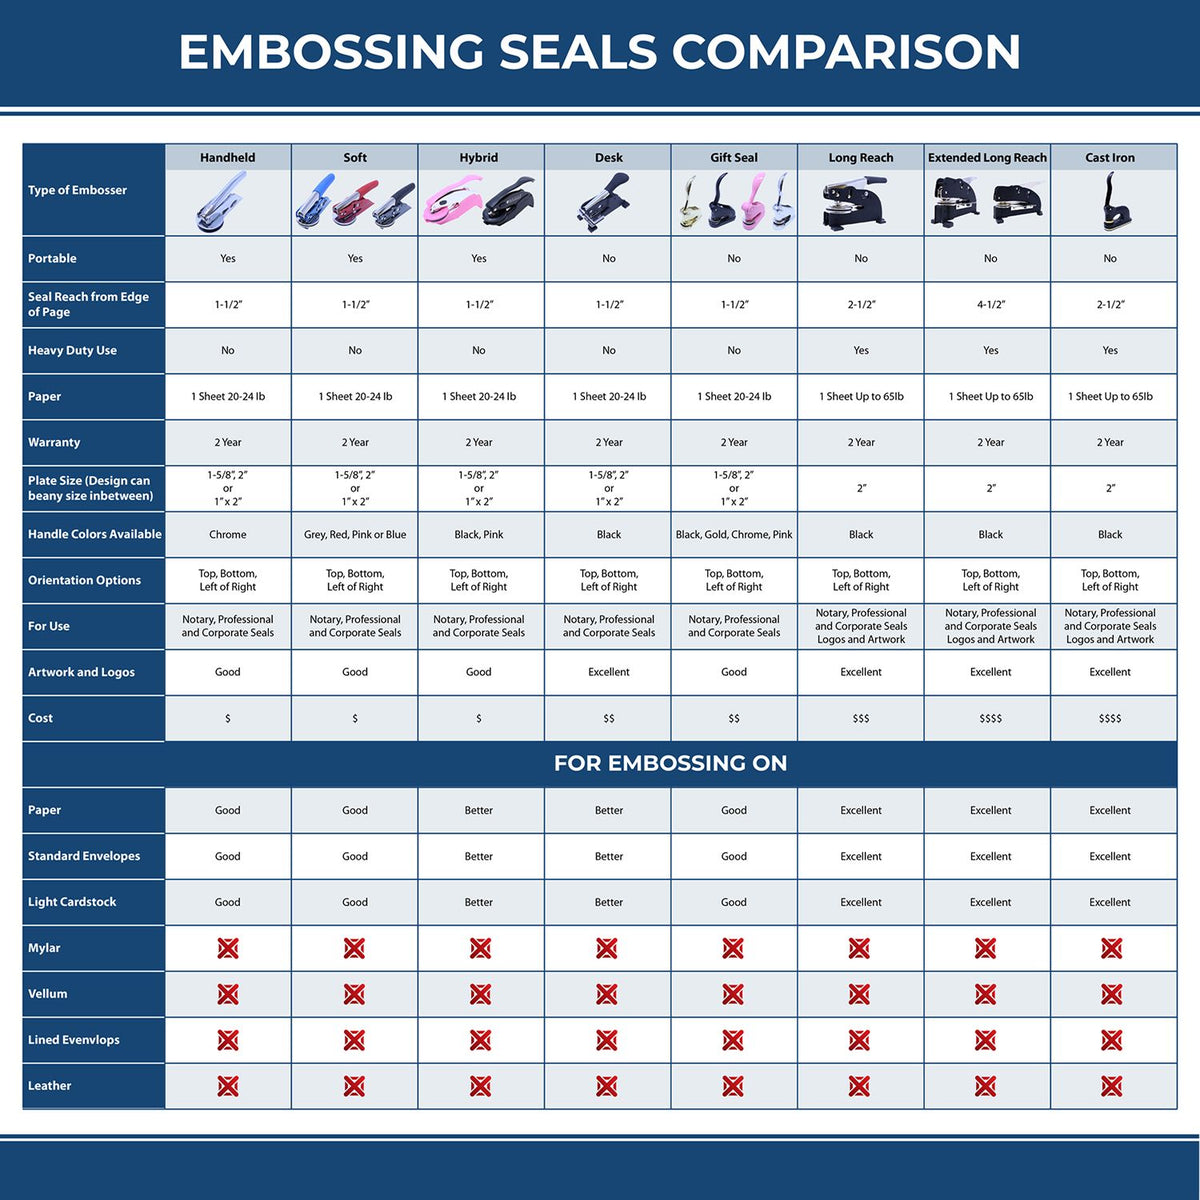 A comparison chart for the different types of mount models available for the State of Indiana Soft Land Surveyor Embossing Seal.